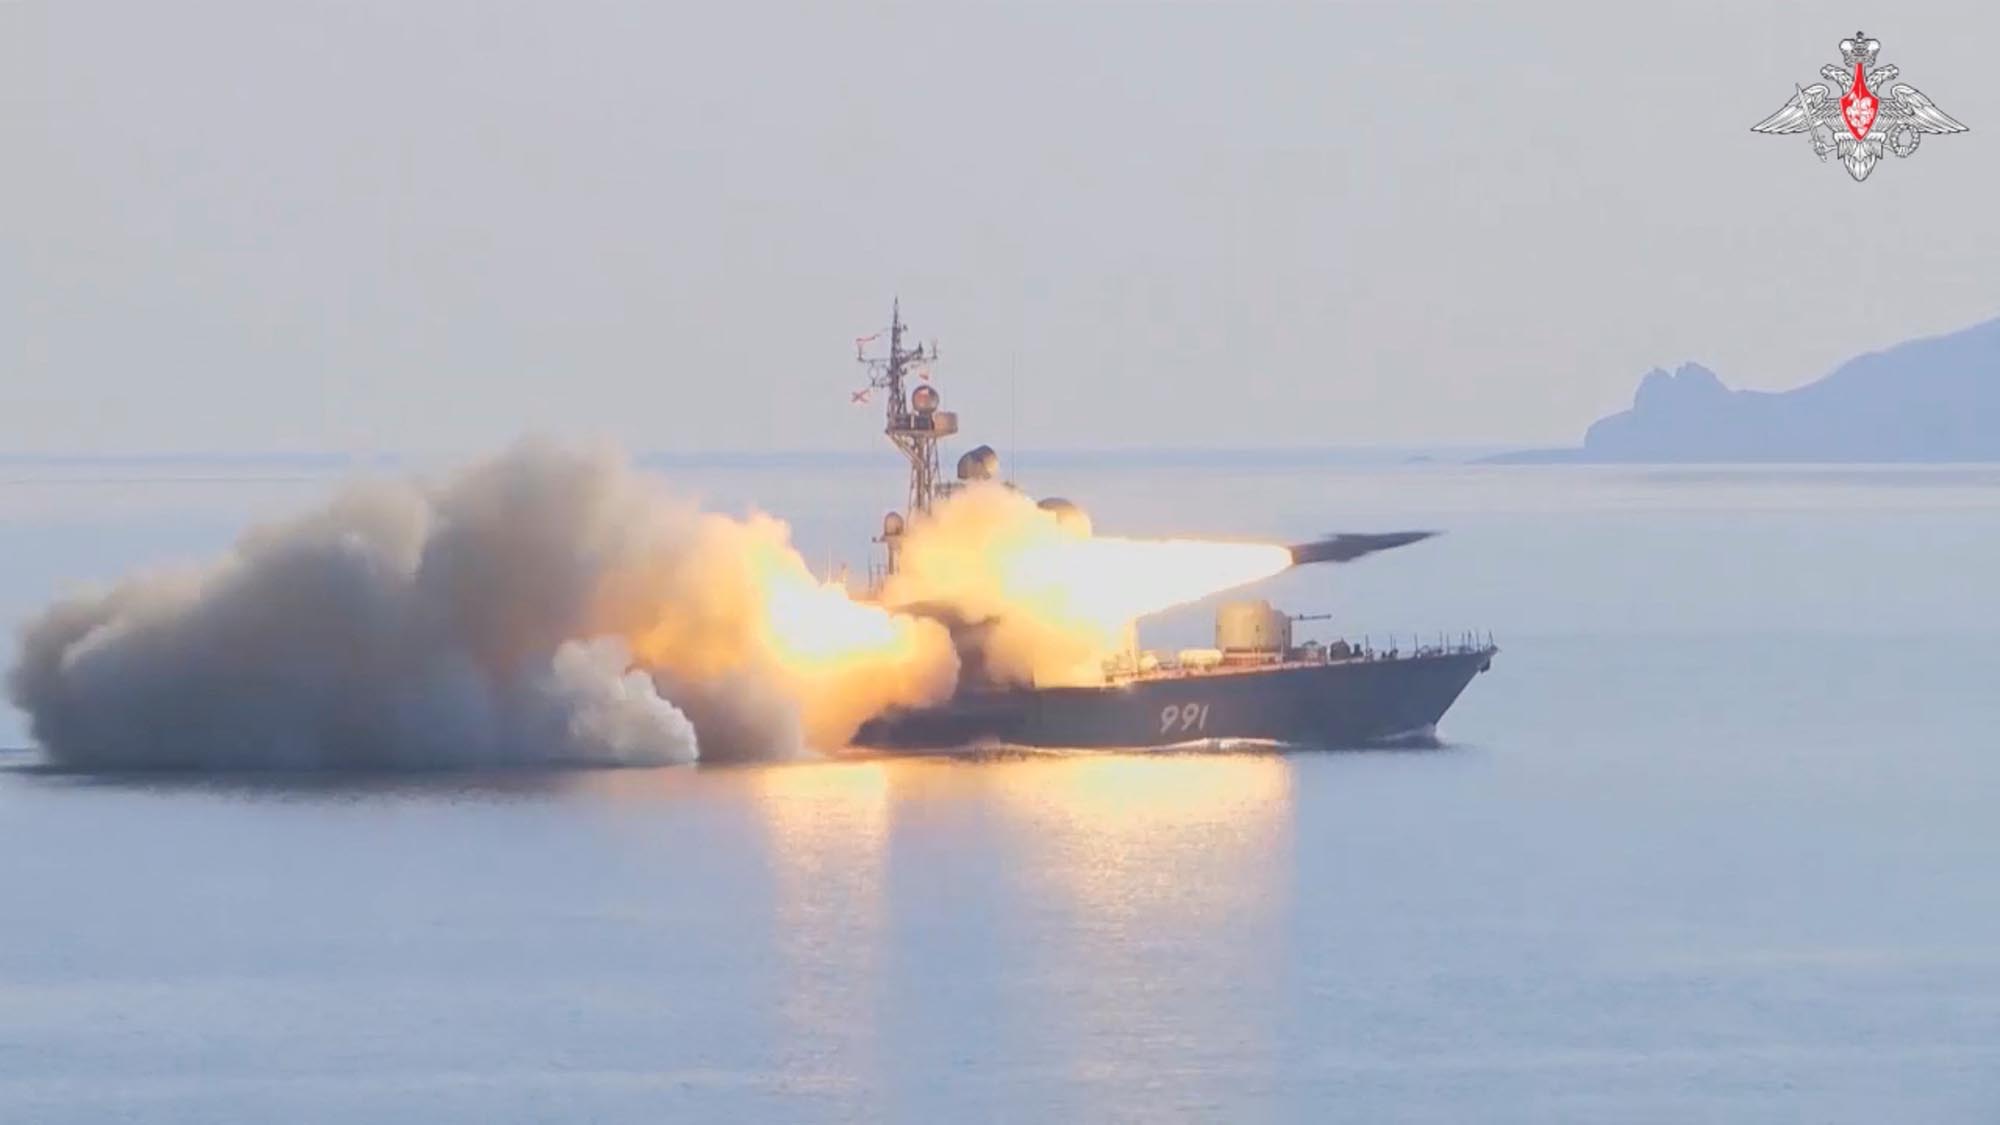 A still image from video released by Russia's Defense Ministry on March 28, shows what it said to be a missile ship of Russia's Pacific Fleet firing a Moskit cruise missile at a mock enemy sea target in waters off Japan's coast.